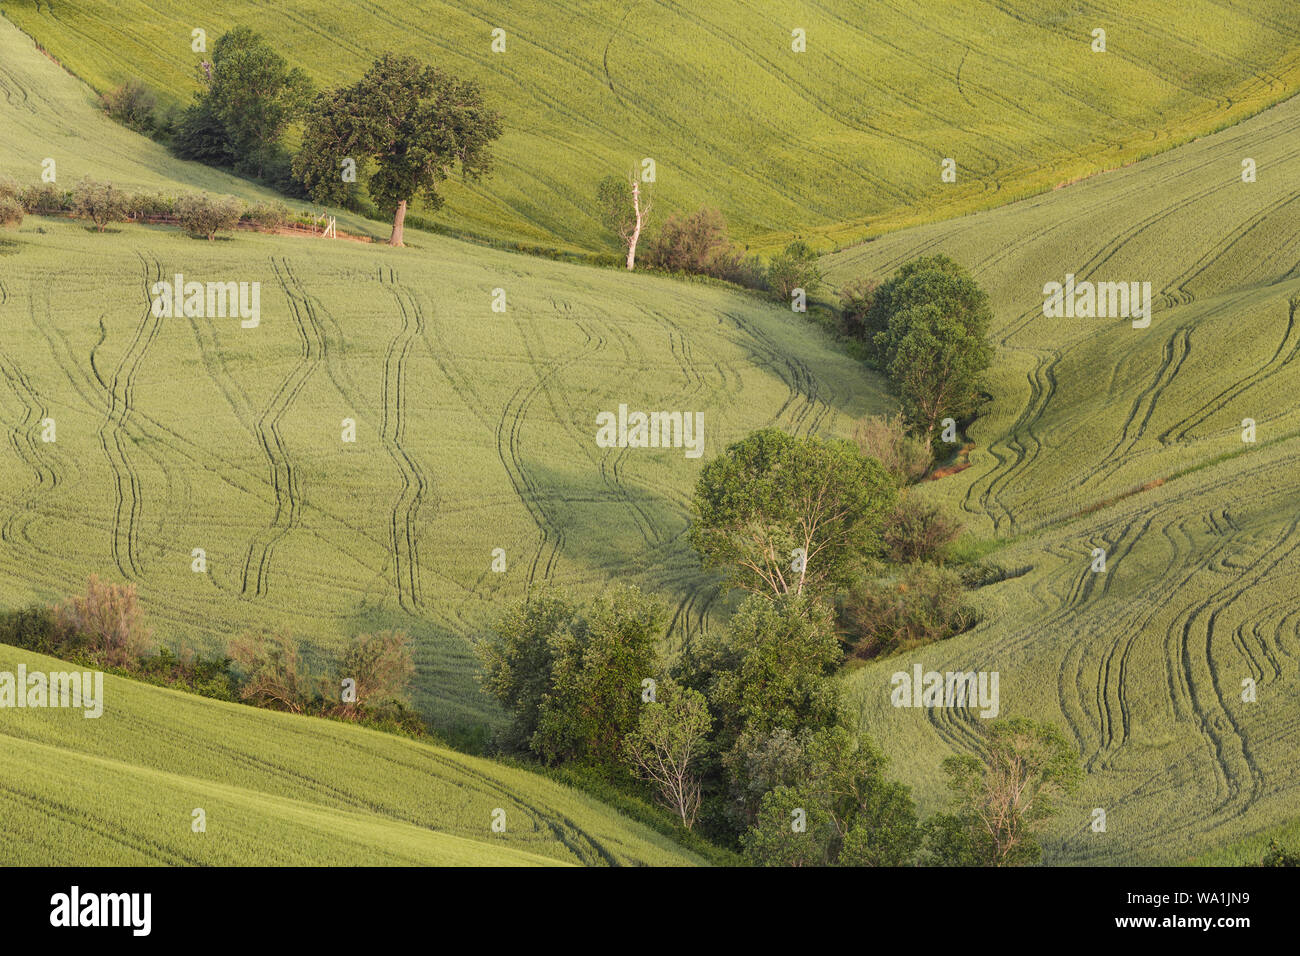 The rolling landscape of Le Marche in Italy. Stock Photo